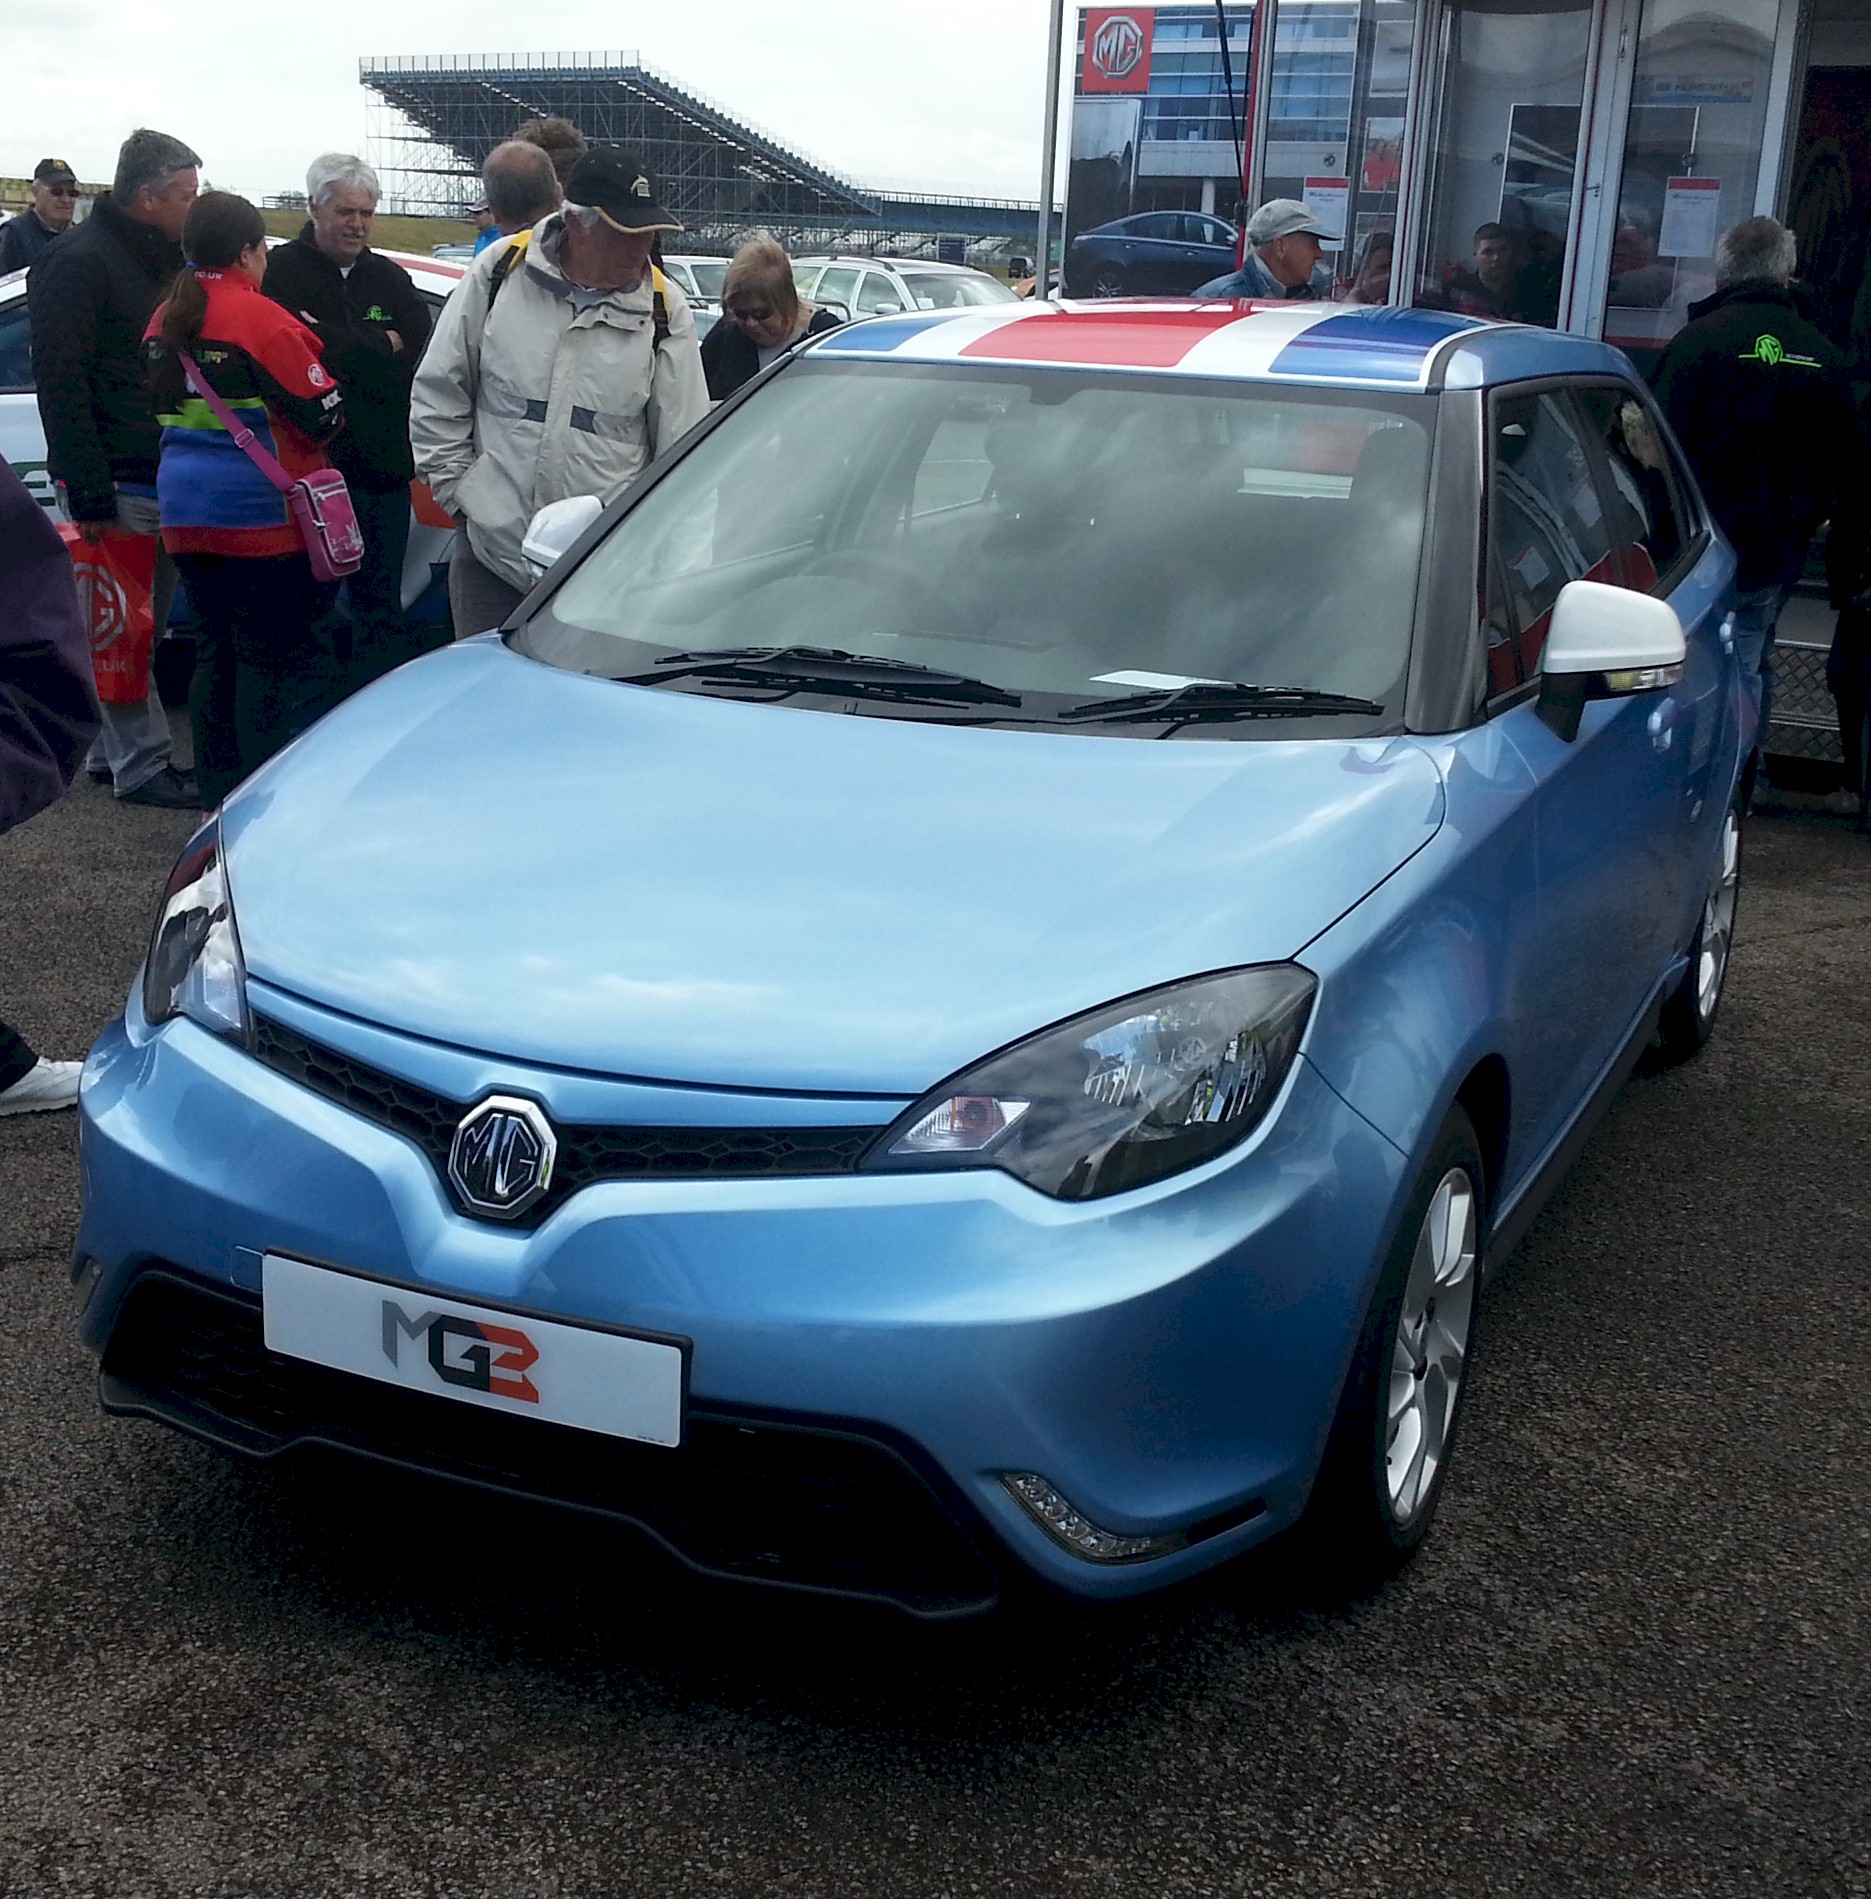 MG3 front end